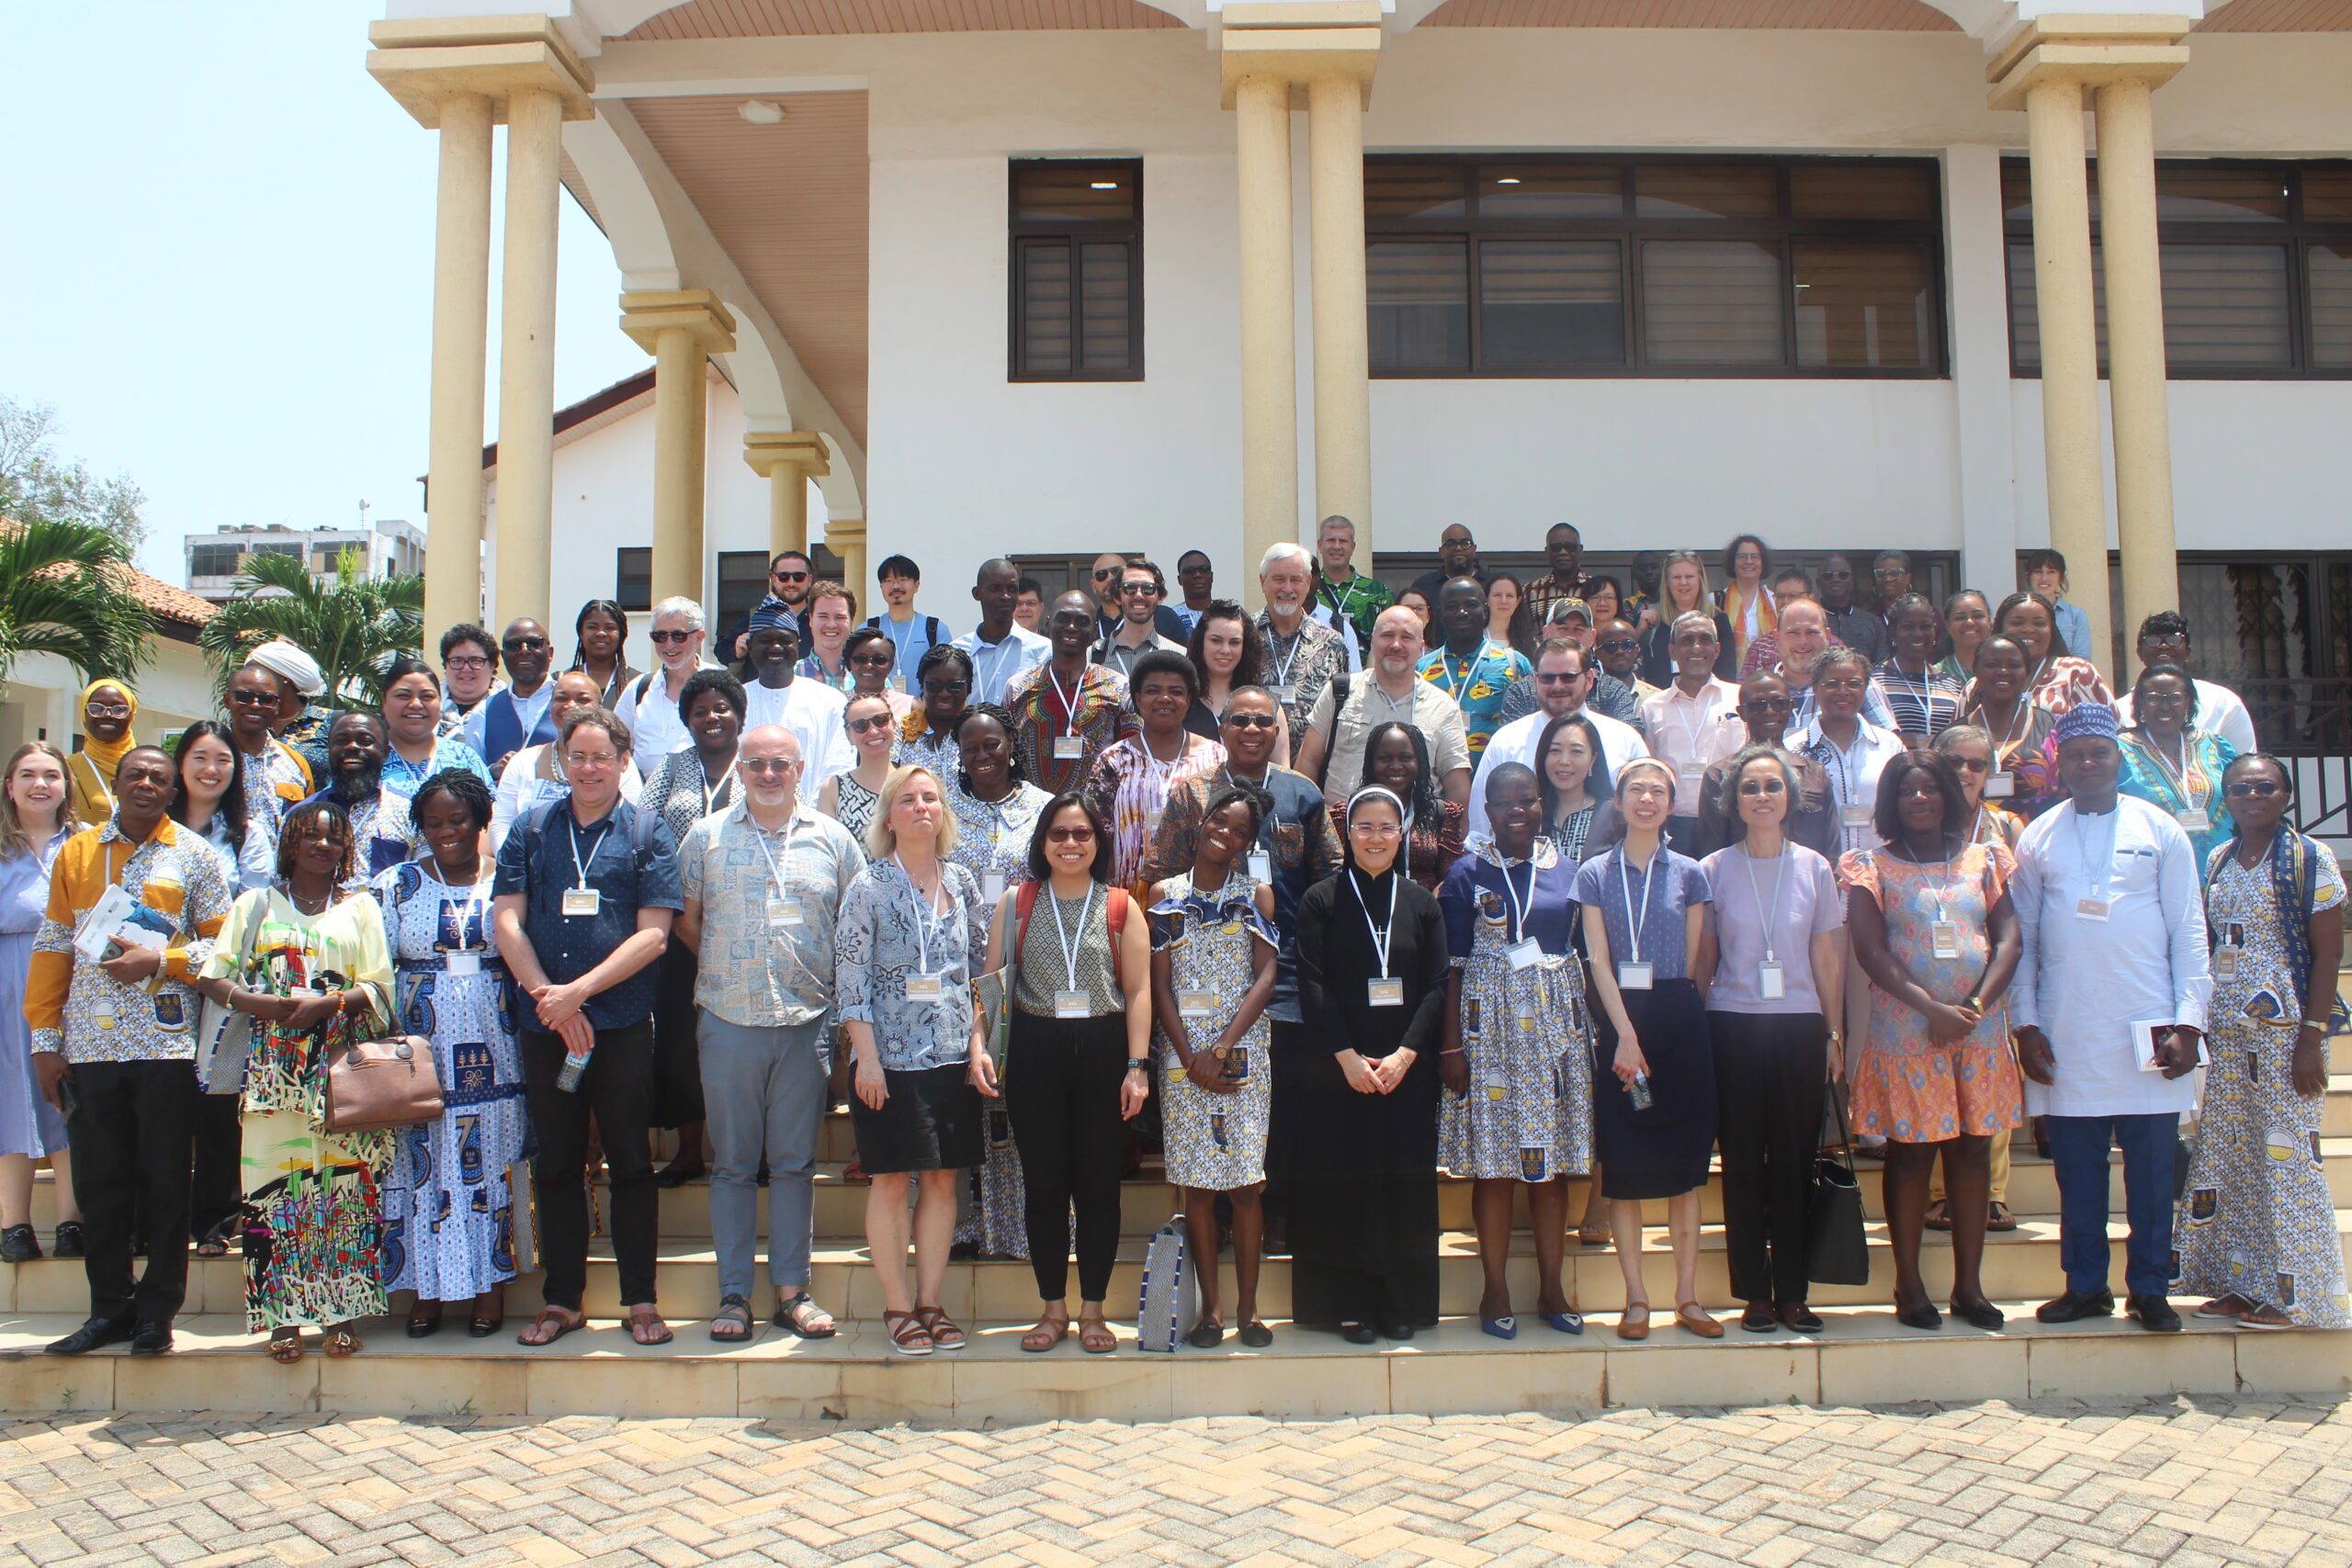 Group photo of the Conference Participants